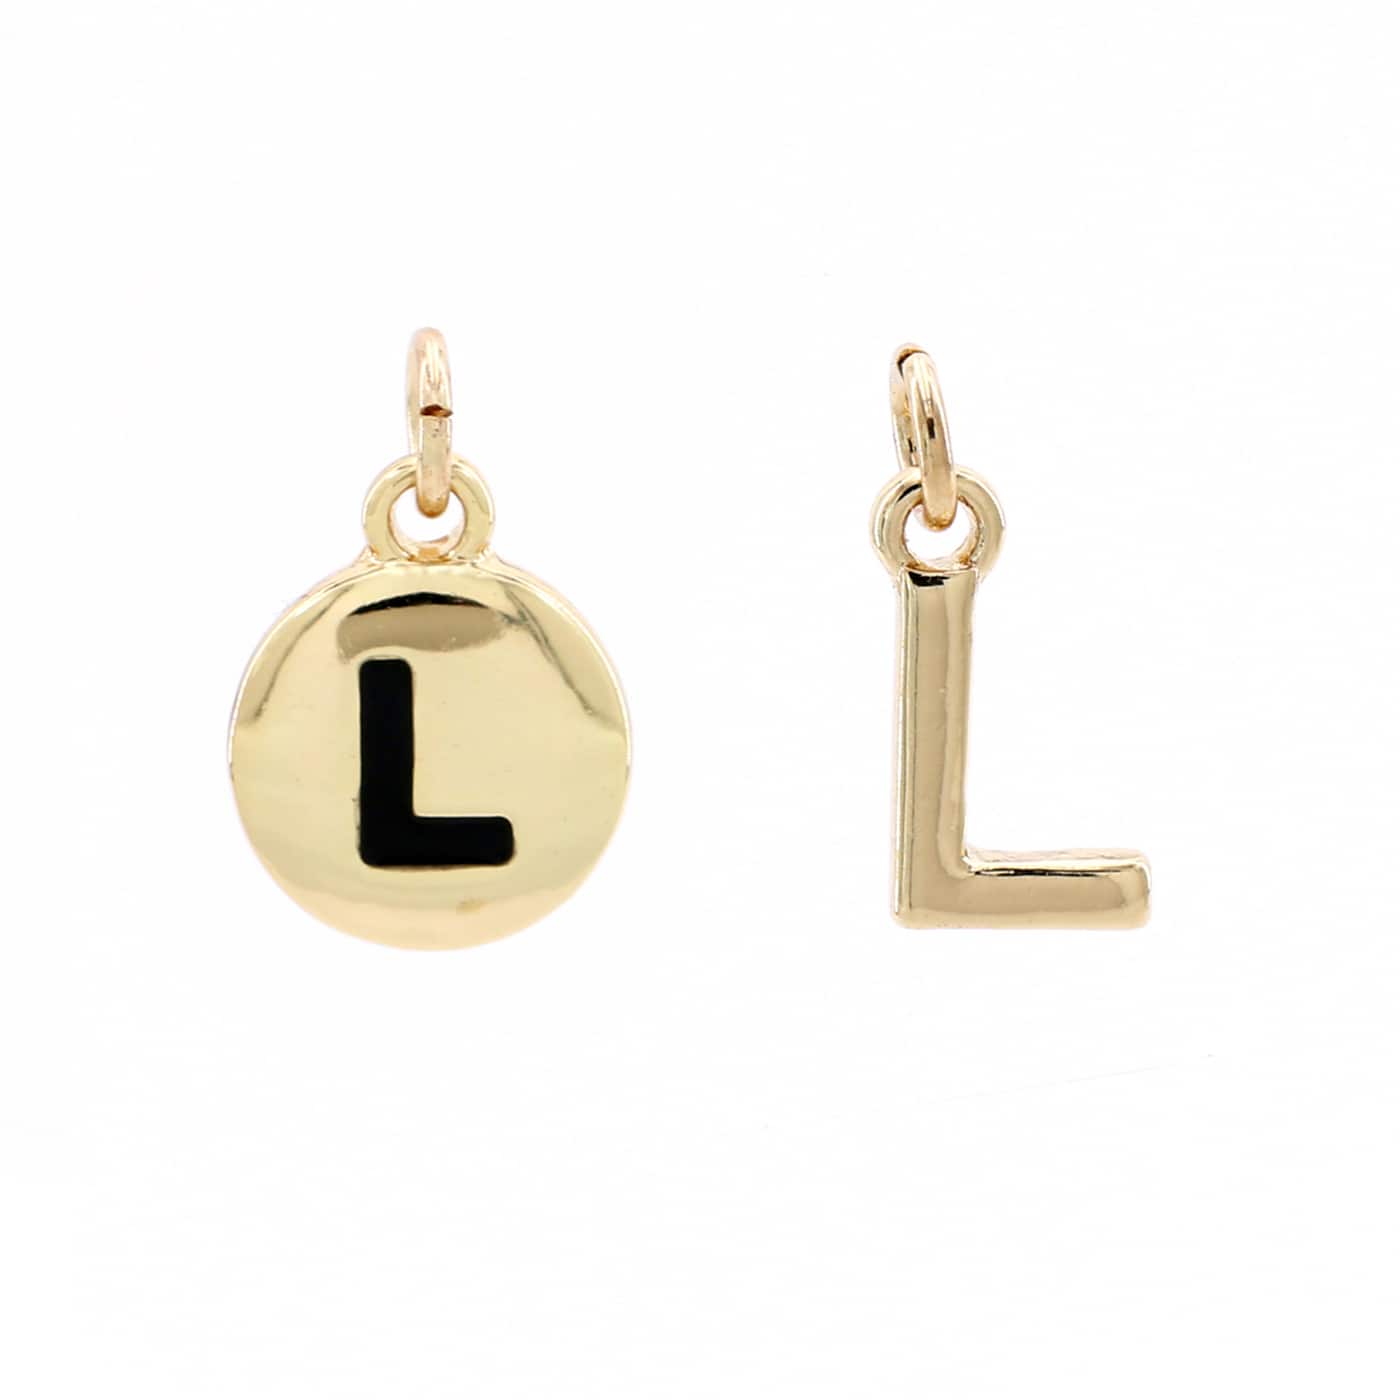 12 Pack: Metal Letter Charms by Bead Landing™